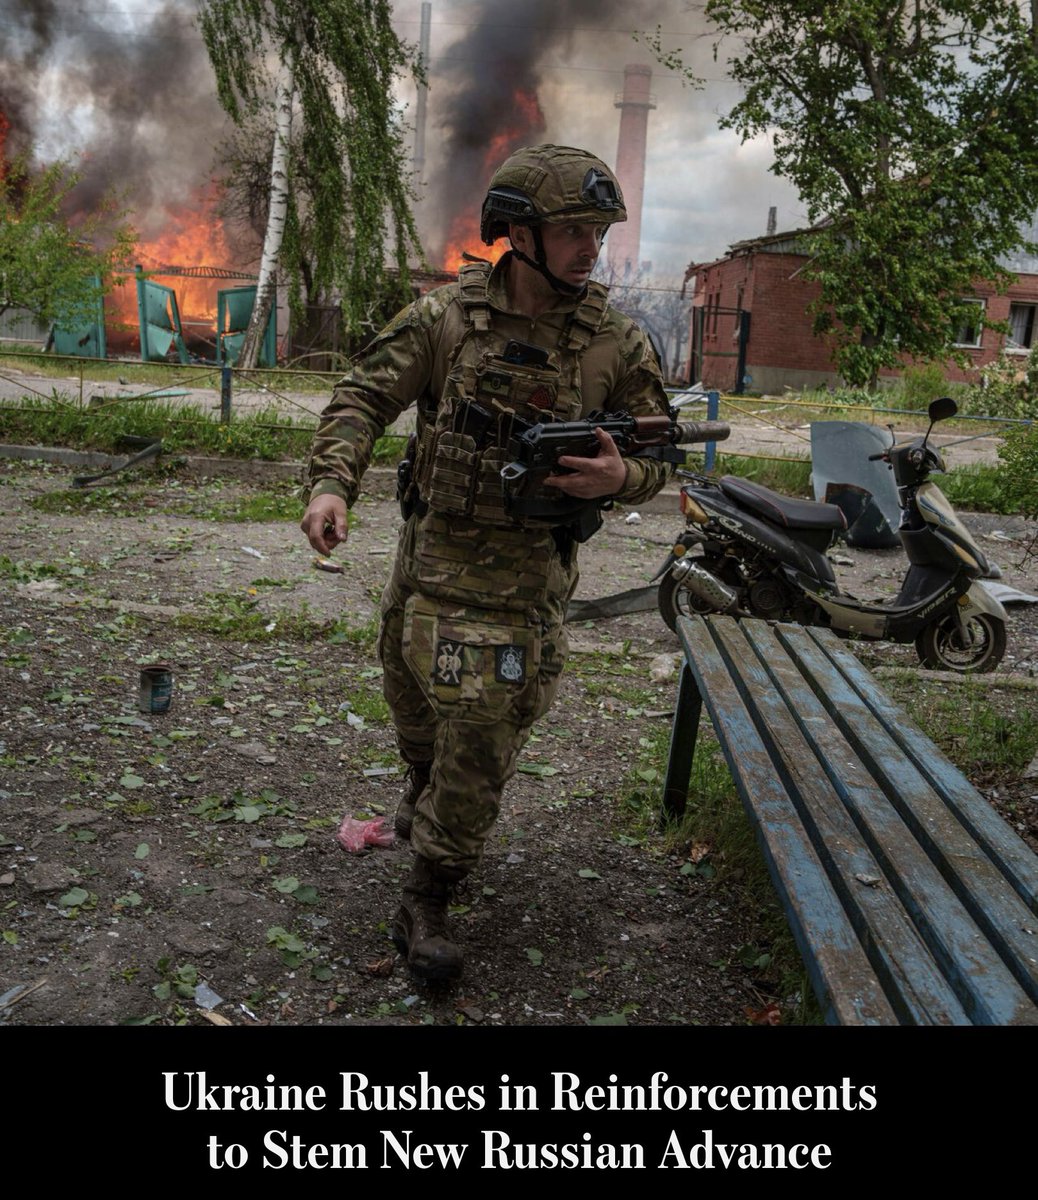 Ukraine, noted for its Westernized culture, beautiful countryside, outer cities, and quaint seaside villages, is being torn to shreds! There’s an ugly ulterior motive for funding hundreds of billions of U.S. dollars into a war Donald Trump said would be lost before it started.